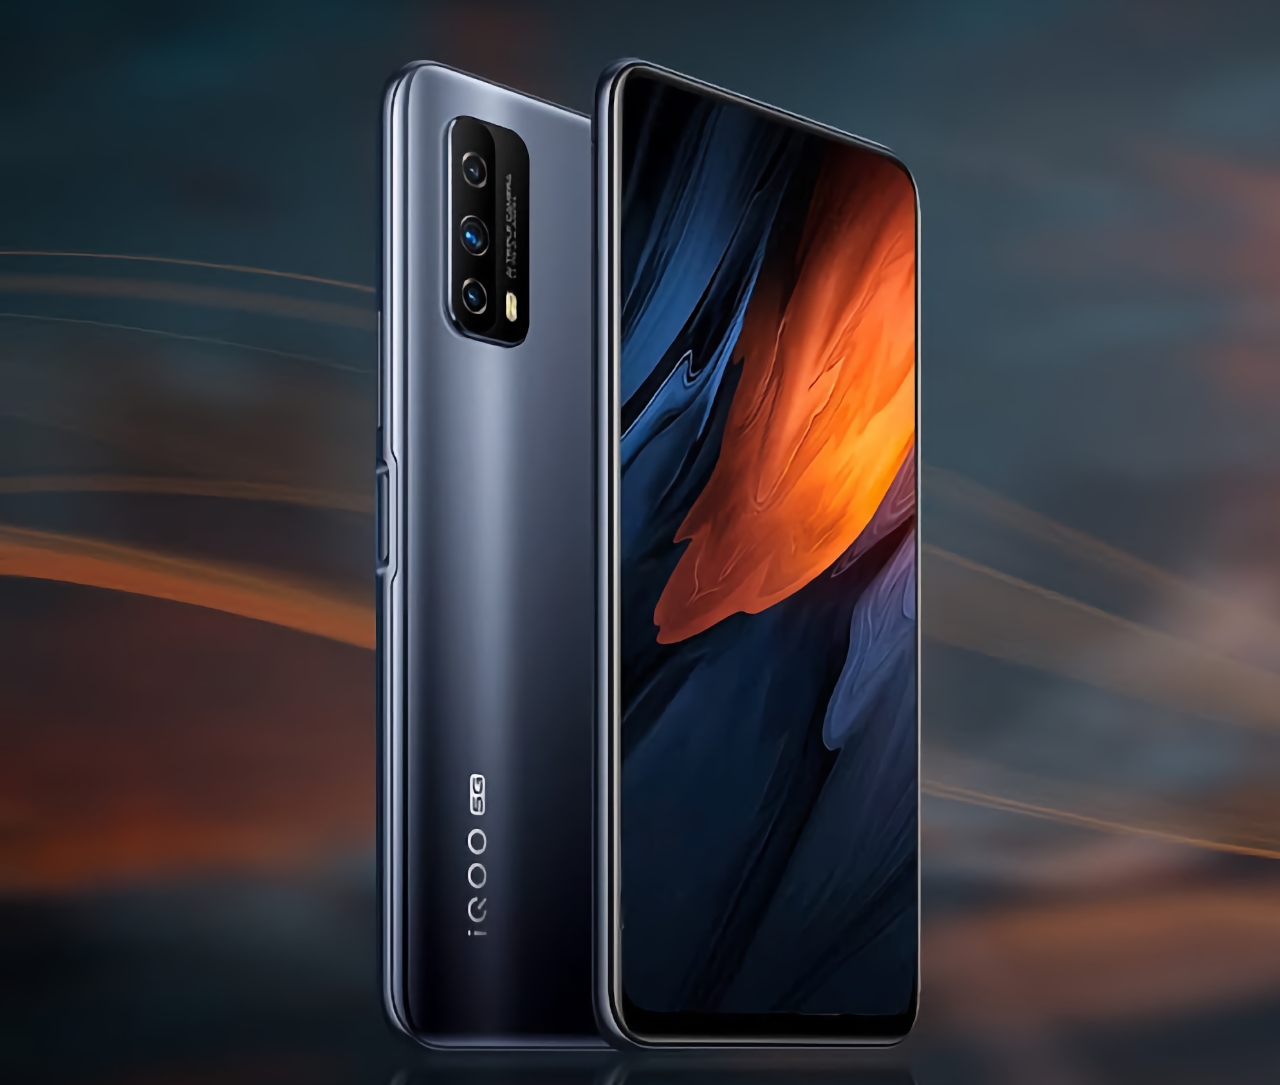 Vivo is preparing to launch the iQOO Z5x smartphone with MediaTek Dimensity 900 processor and 44W fast charging